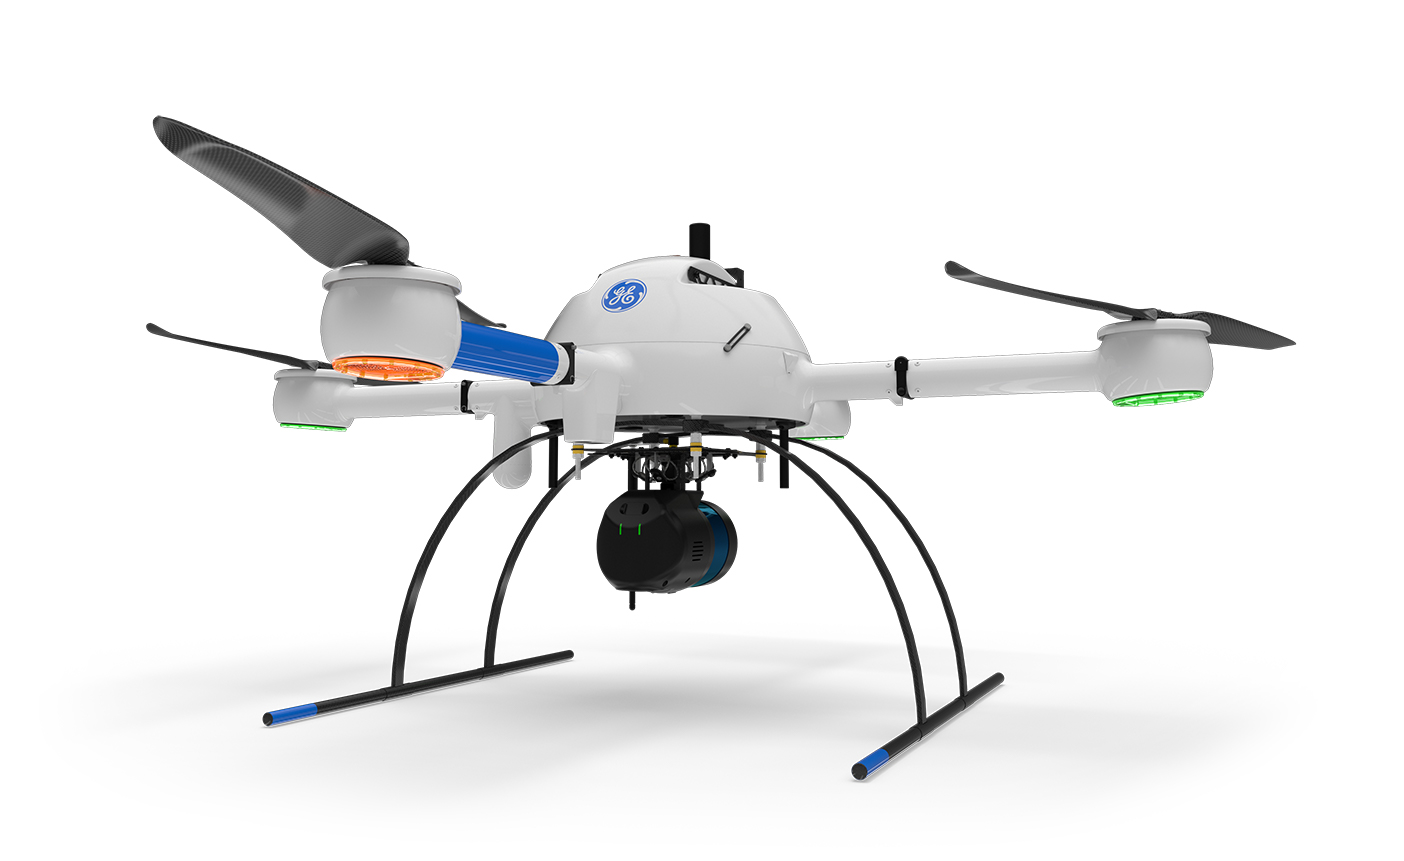 The newest member of the GE industrial drone line, the mdLIDAR1000LR